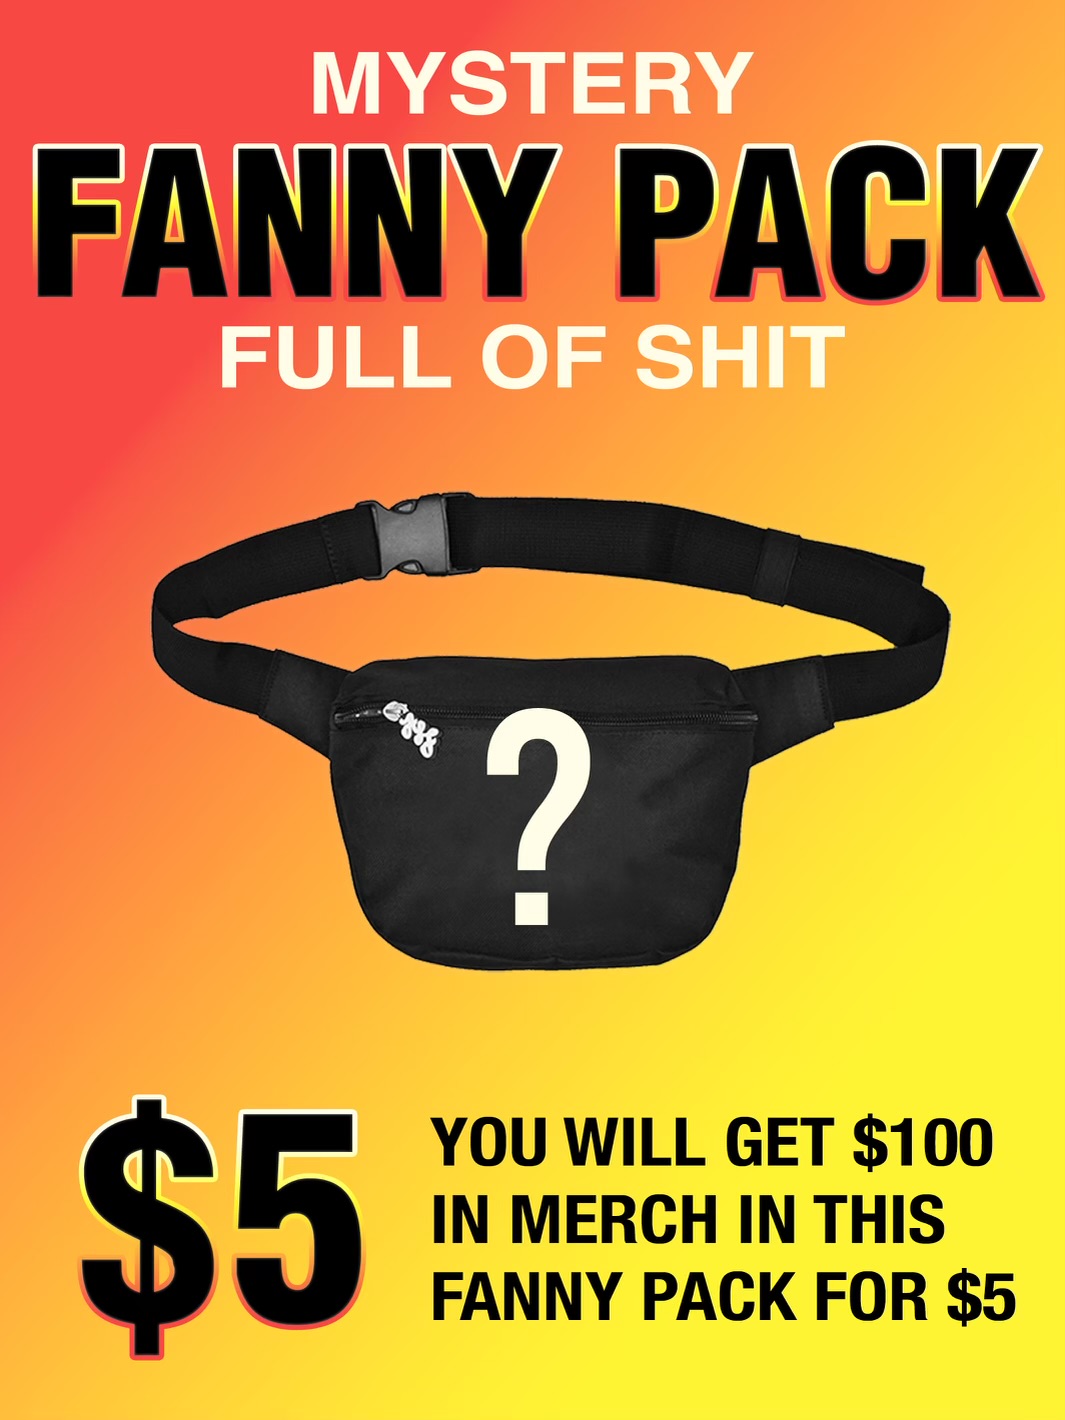 MYSTERY FANNY PACK FULL OF SHIT - YOU WILL GET $100 IN MERCH IN THIS FANNY PACK FOR $5 